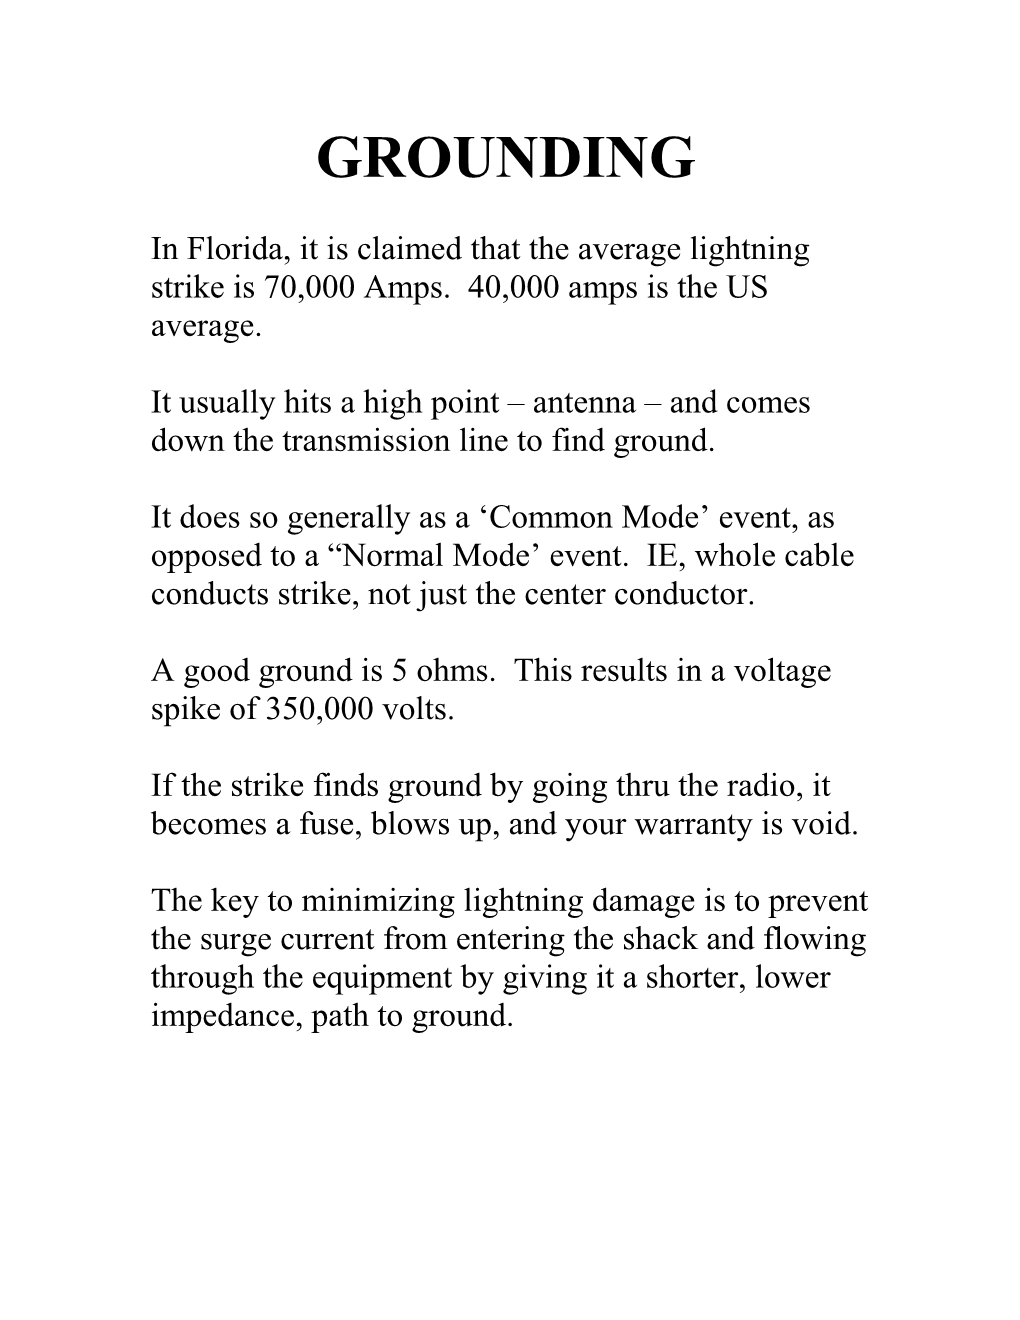 In Florida, It Is Claimed That the Average Lightning Strike Is 70,000 Amps. 40,000 Amps